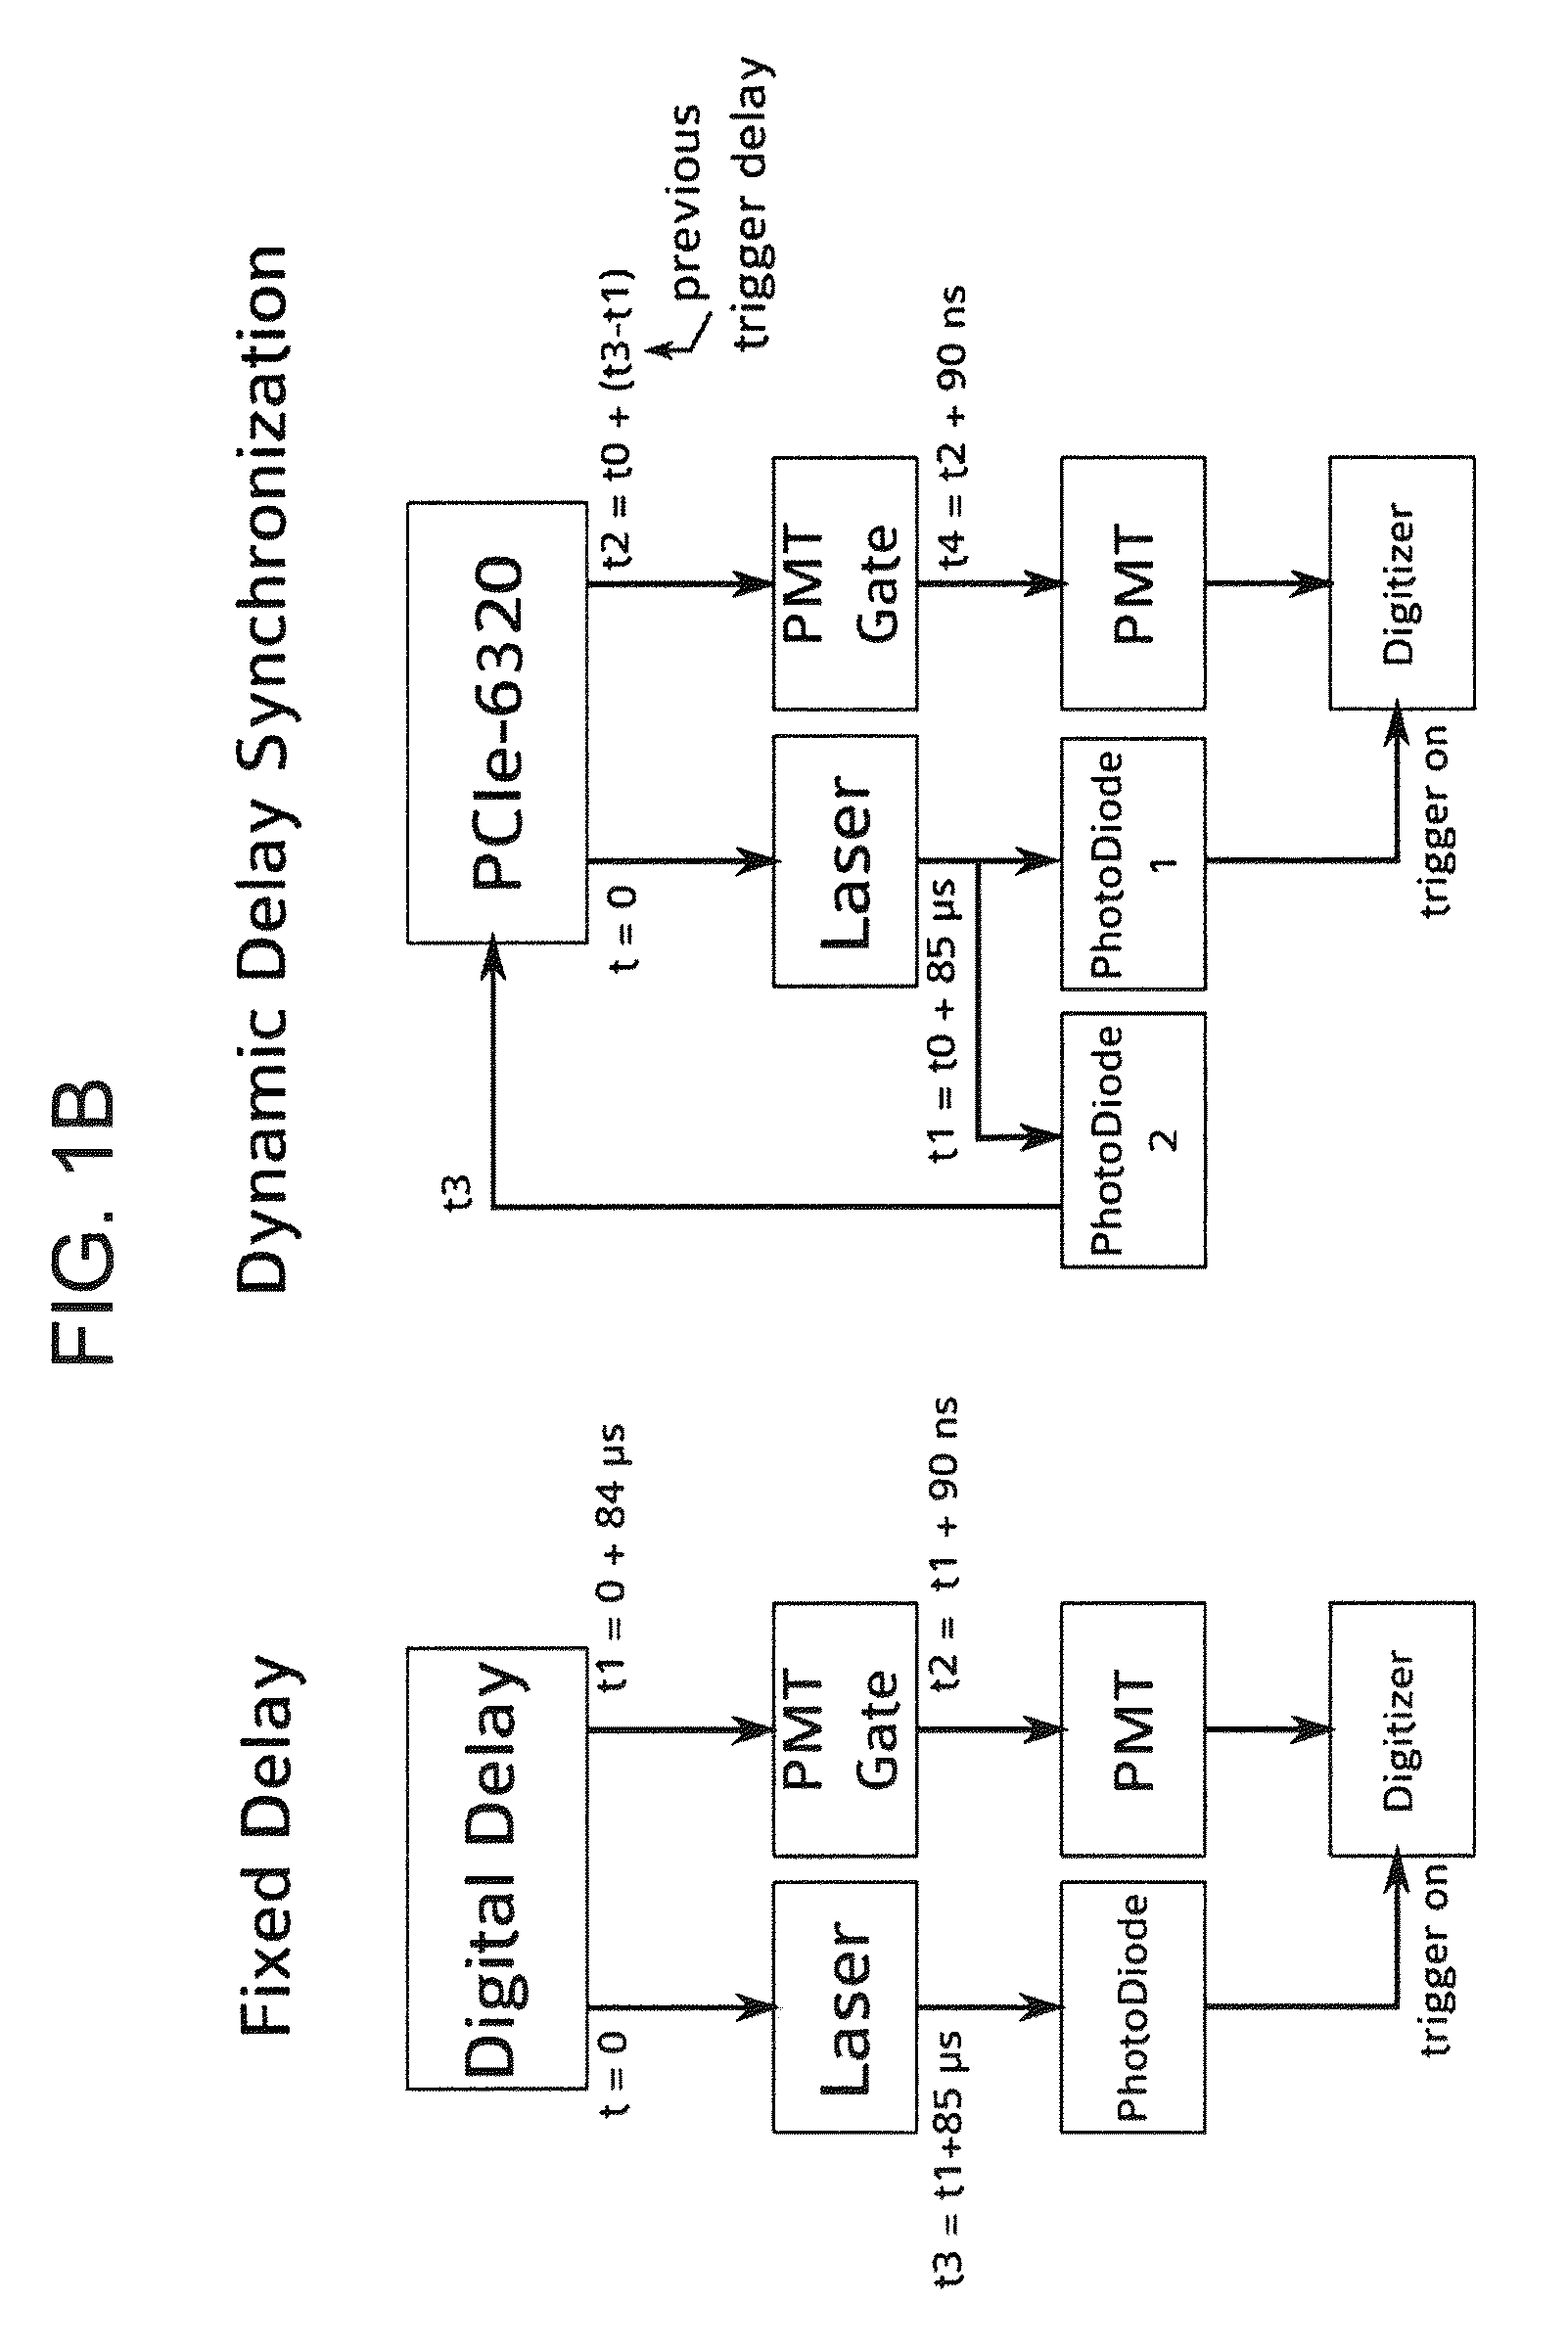 Time-resolved laser-induced fluorescence spectroscopy systems and uses thereof